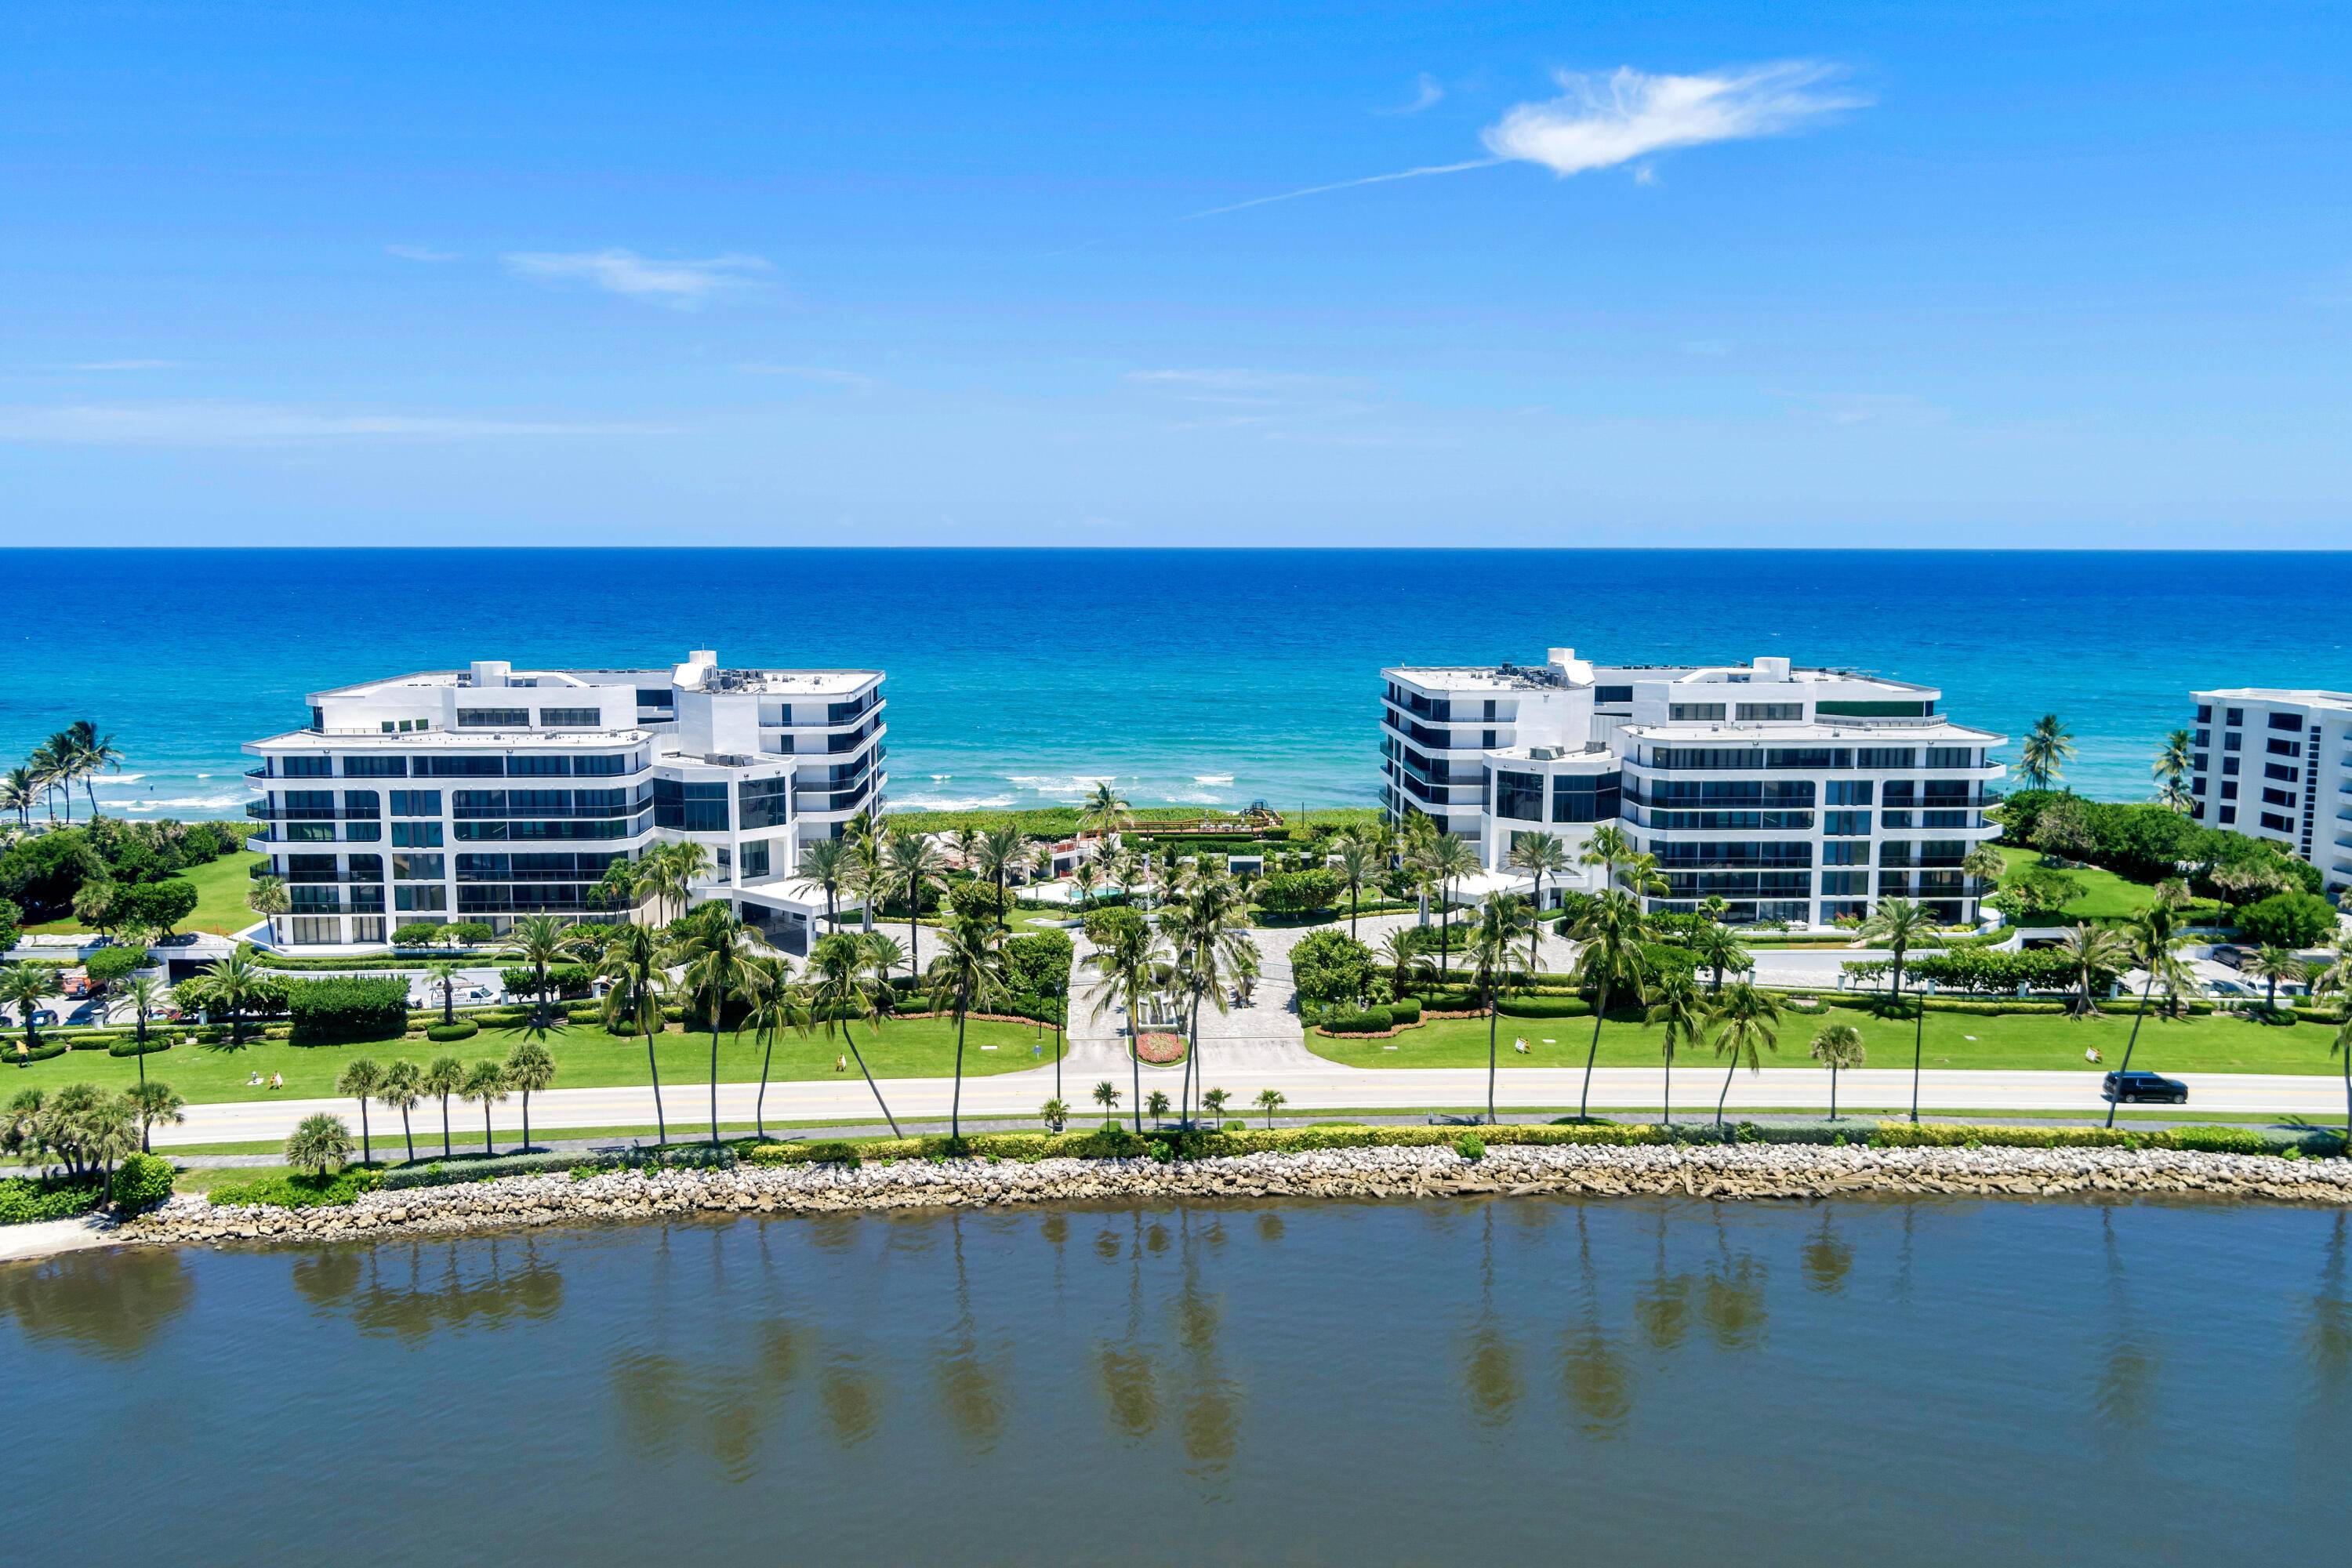 Welcome to the Palm Beach Hampton, where luxury and oceanfront living meet.